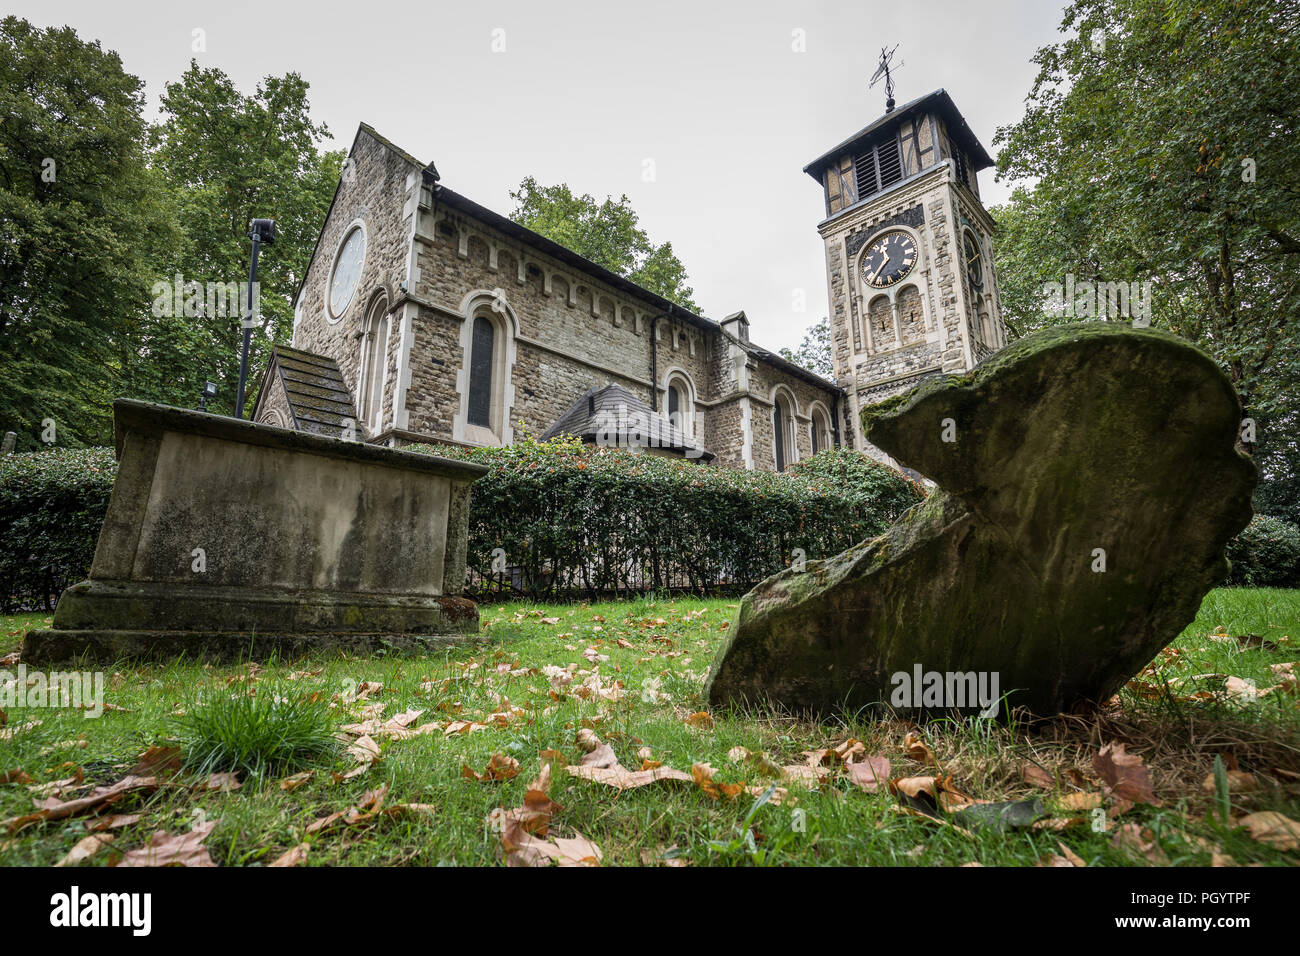 St Pancras Old Church in Somers Town, London, UK. Stock Photo